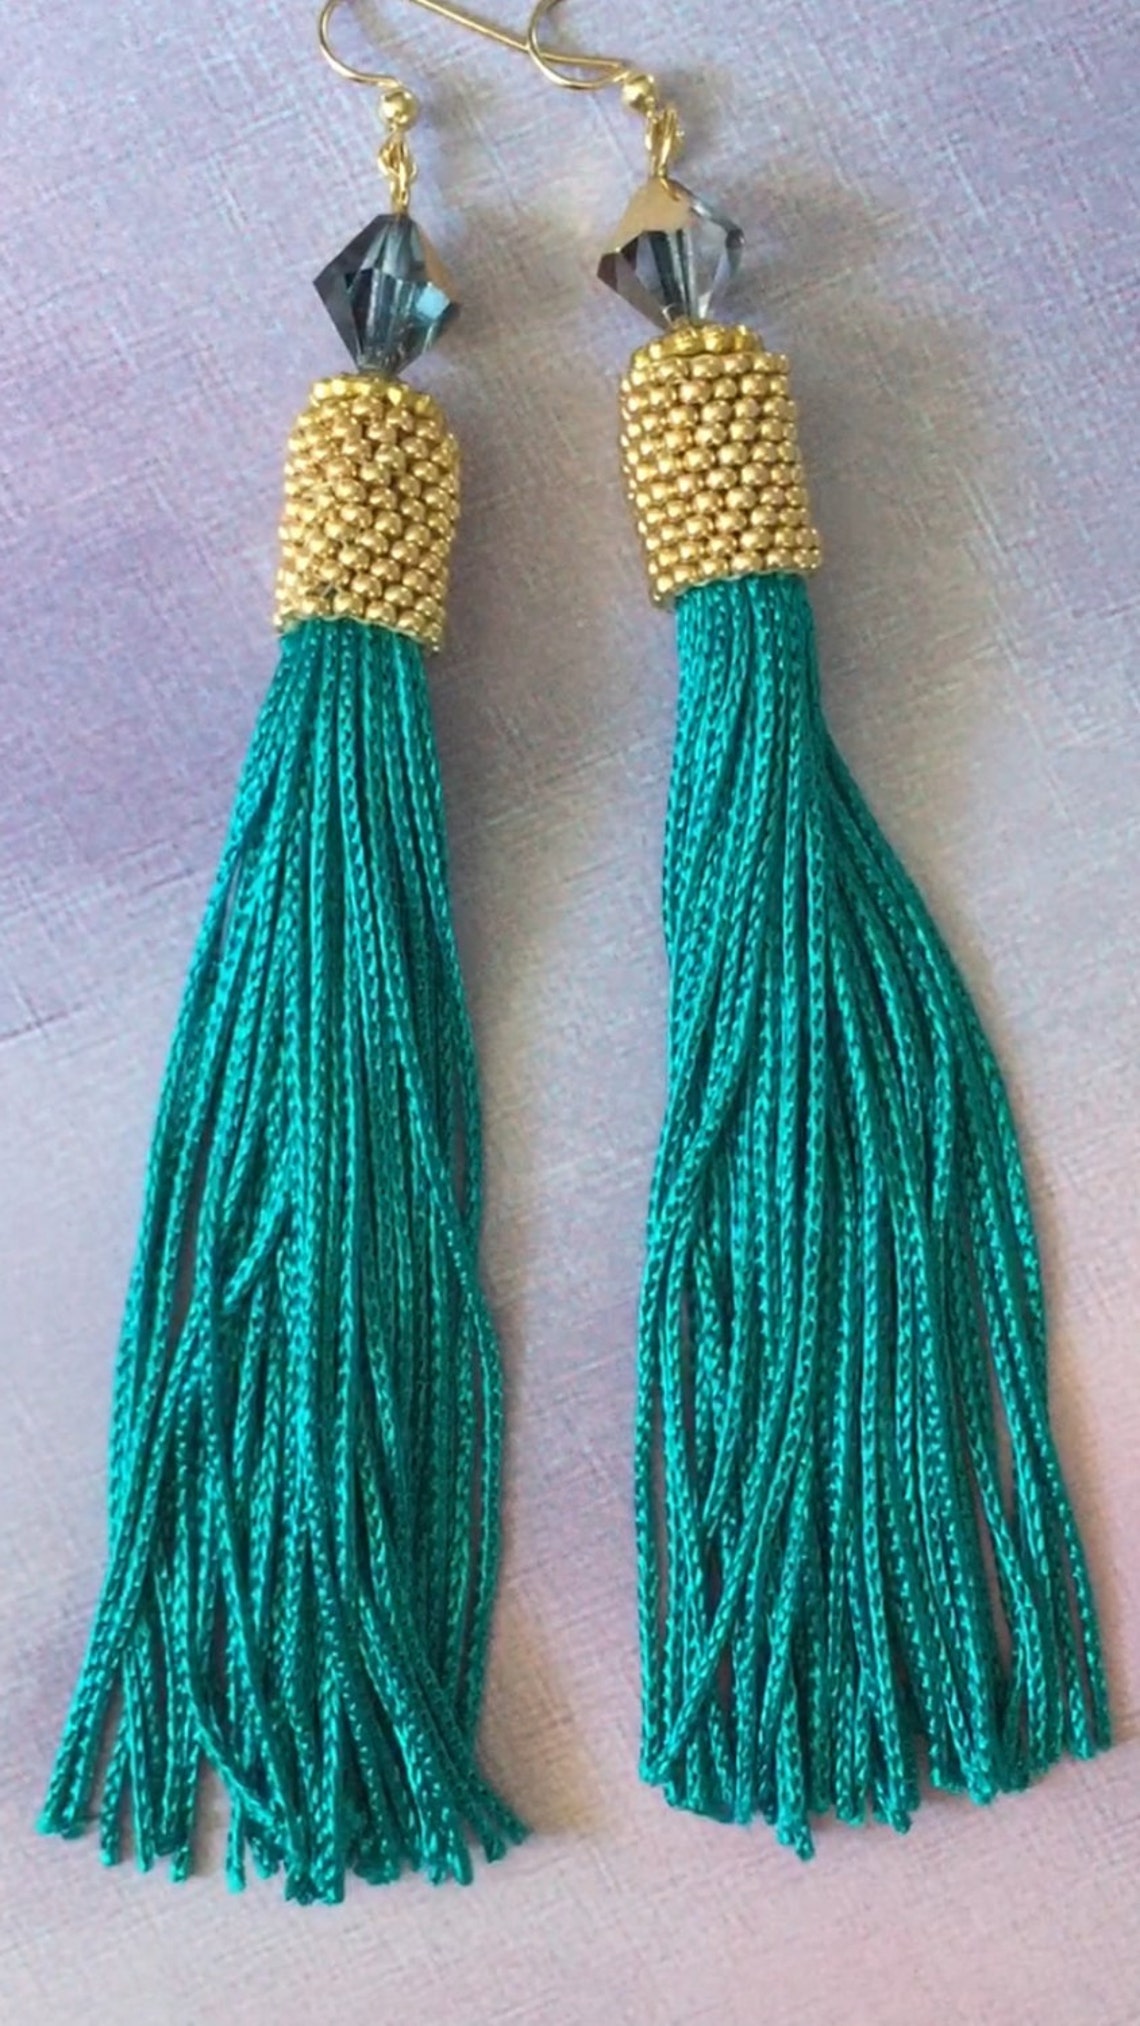 Long Seed Bead Tassel Earrings Beaded Bright Teal and Gold | Etsy